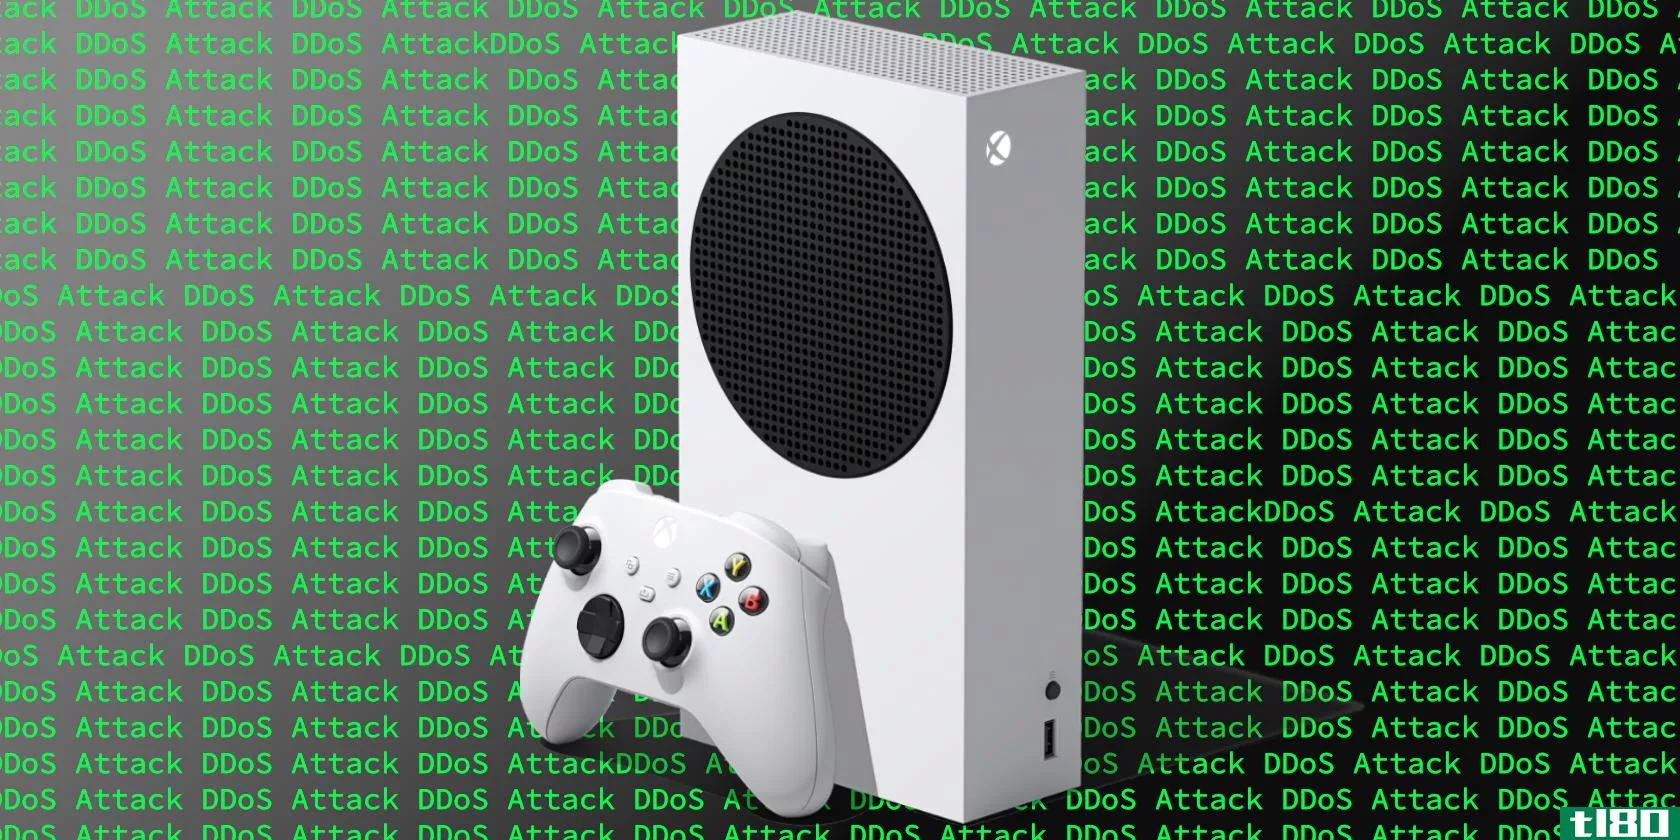 Xbox Series S with DDoS Attack Background